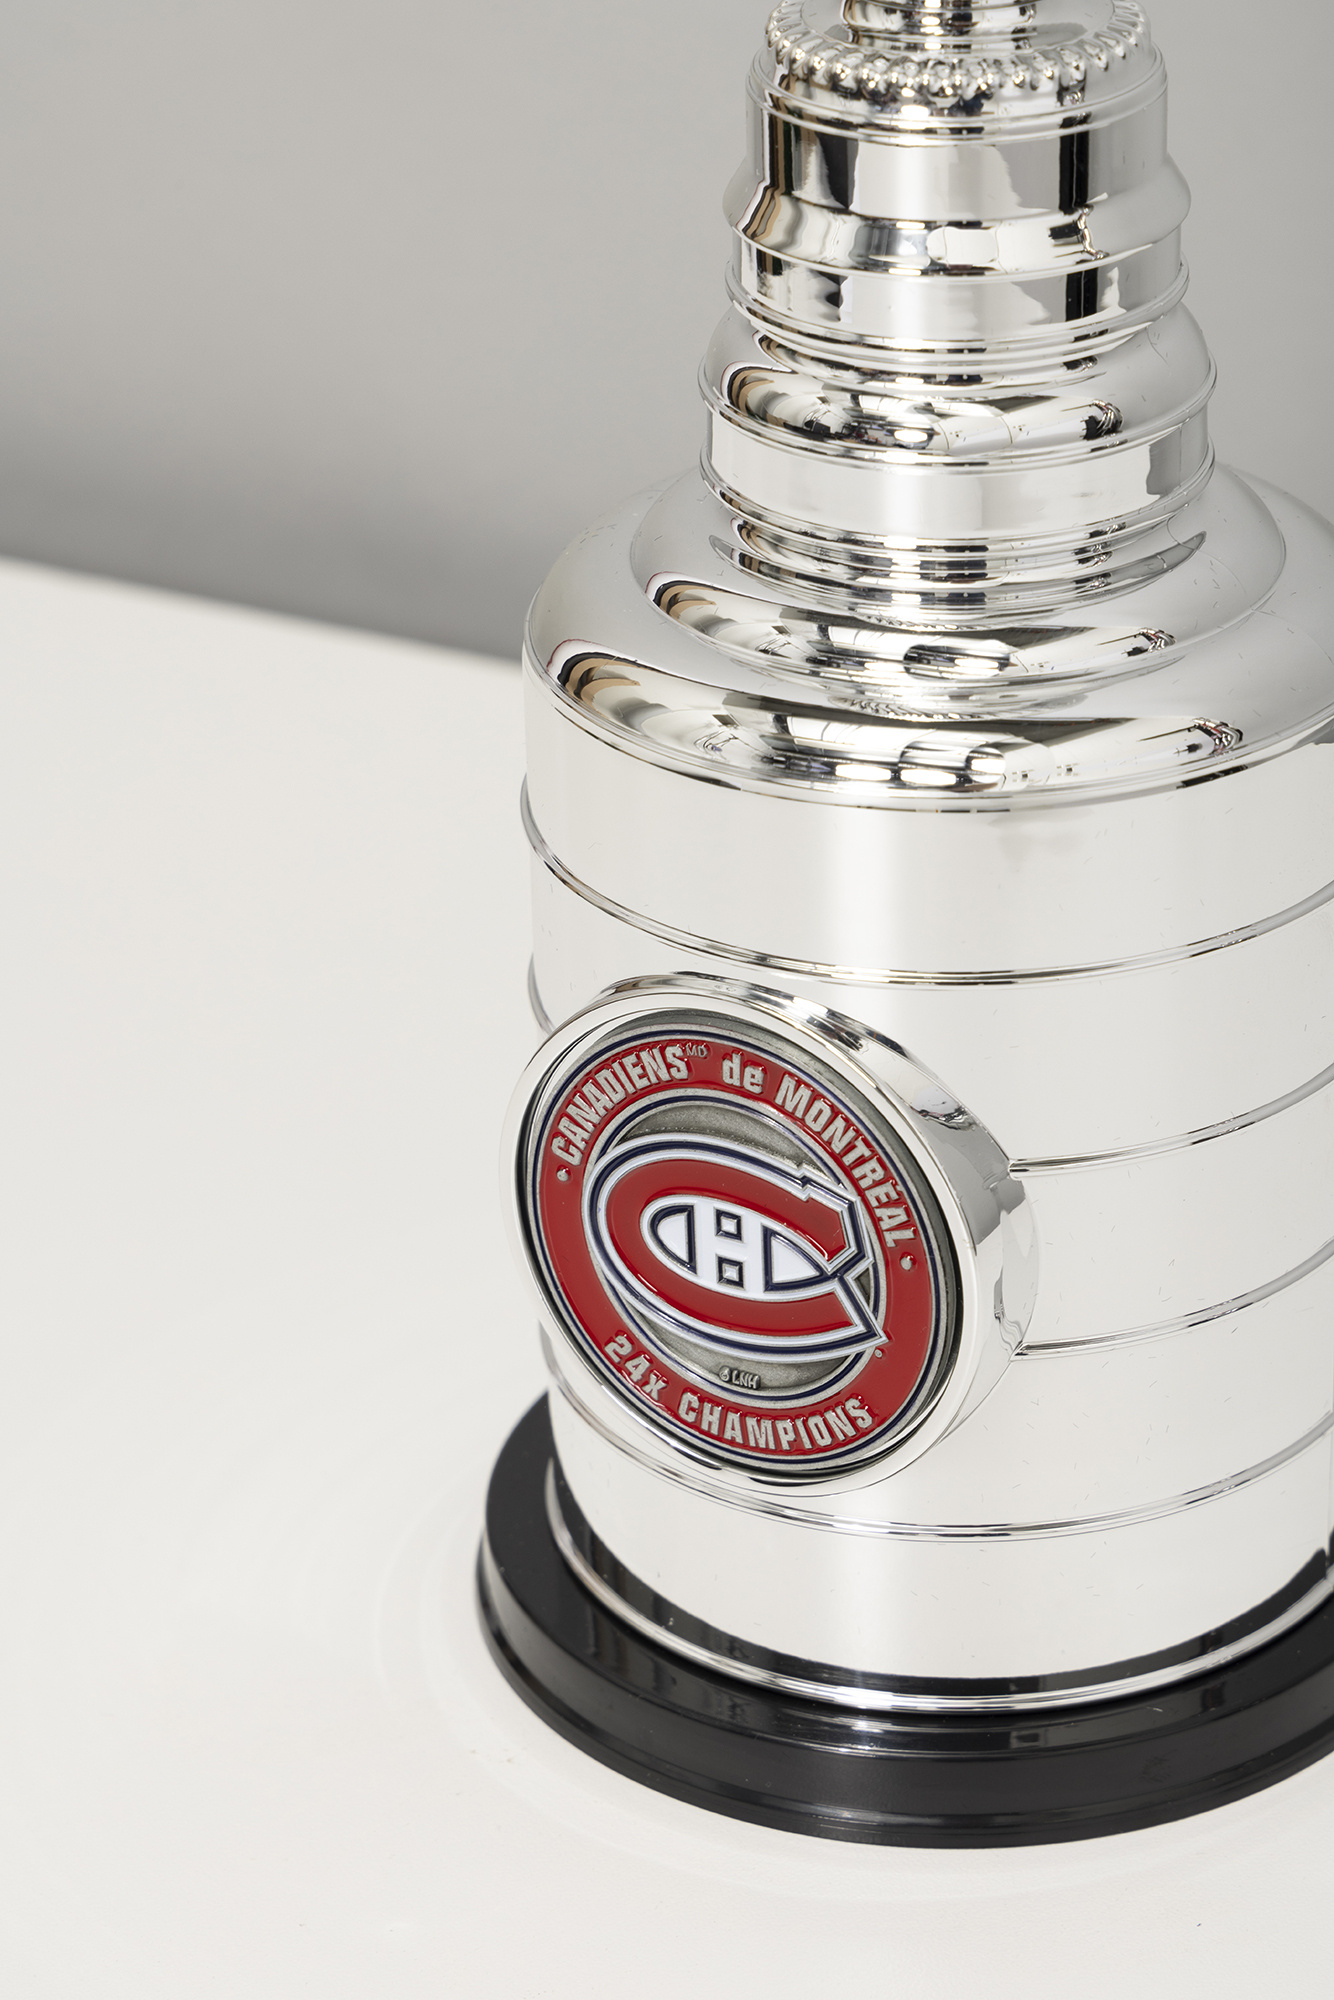 Montreal Canadiens 8 inch REAL Glass Replica NHL Hockey Stanley Cup